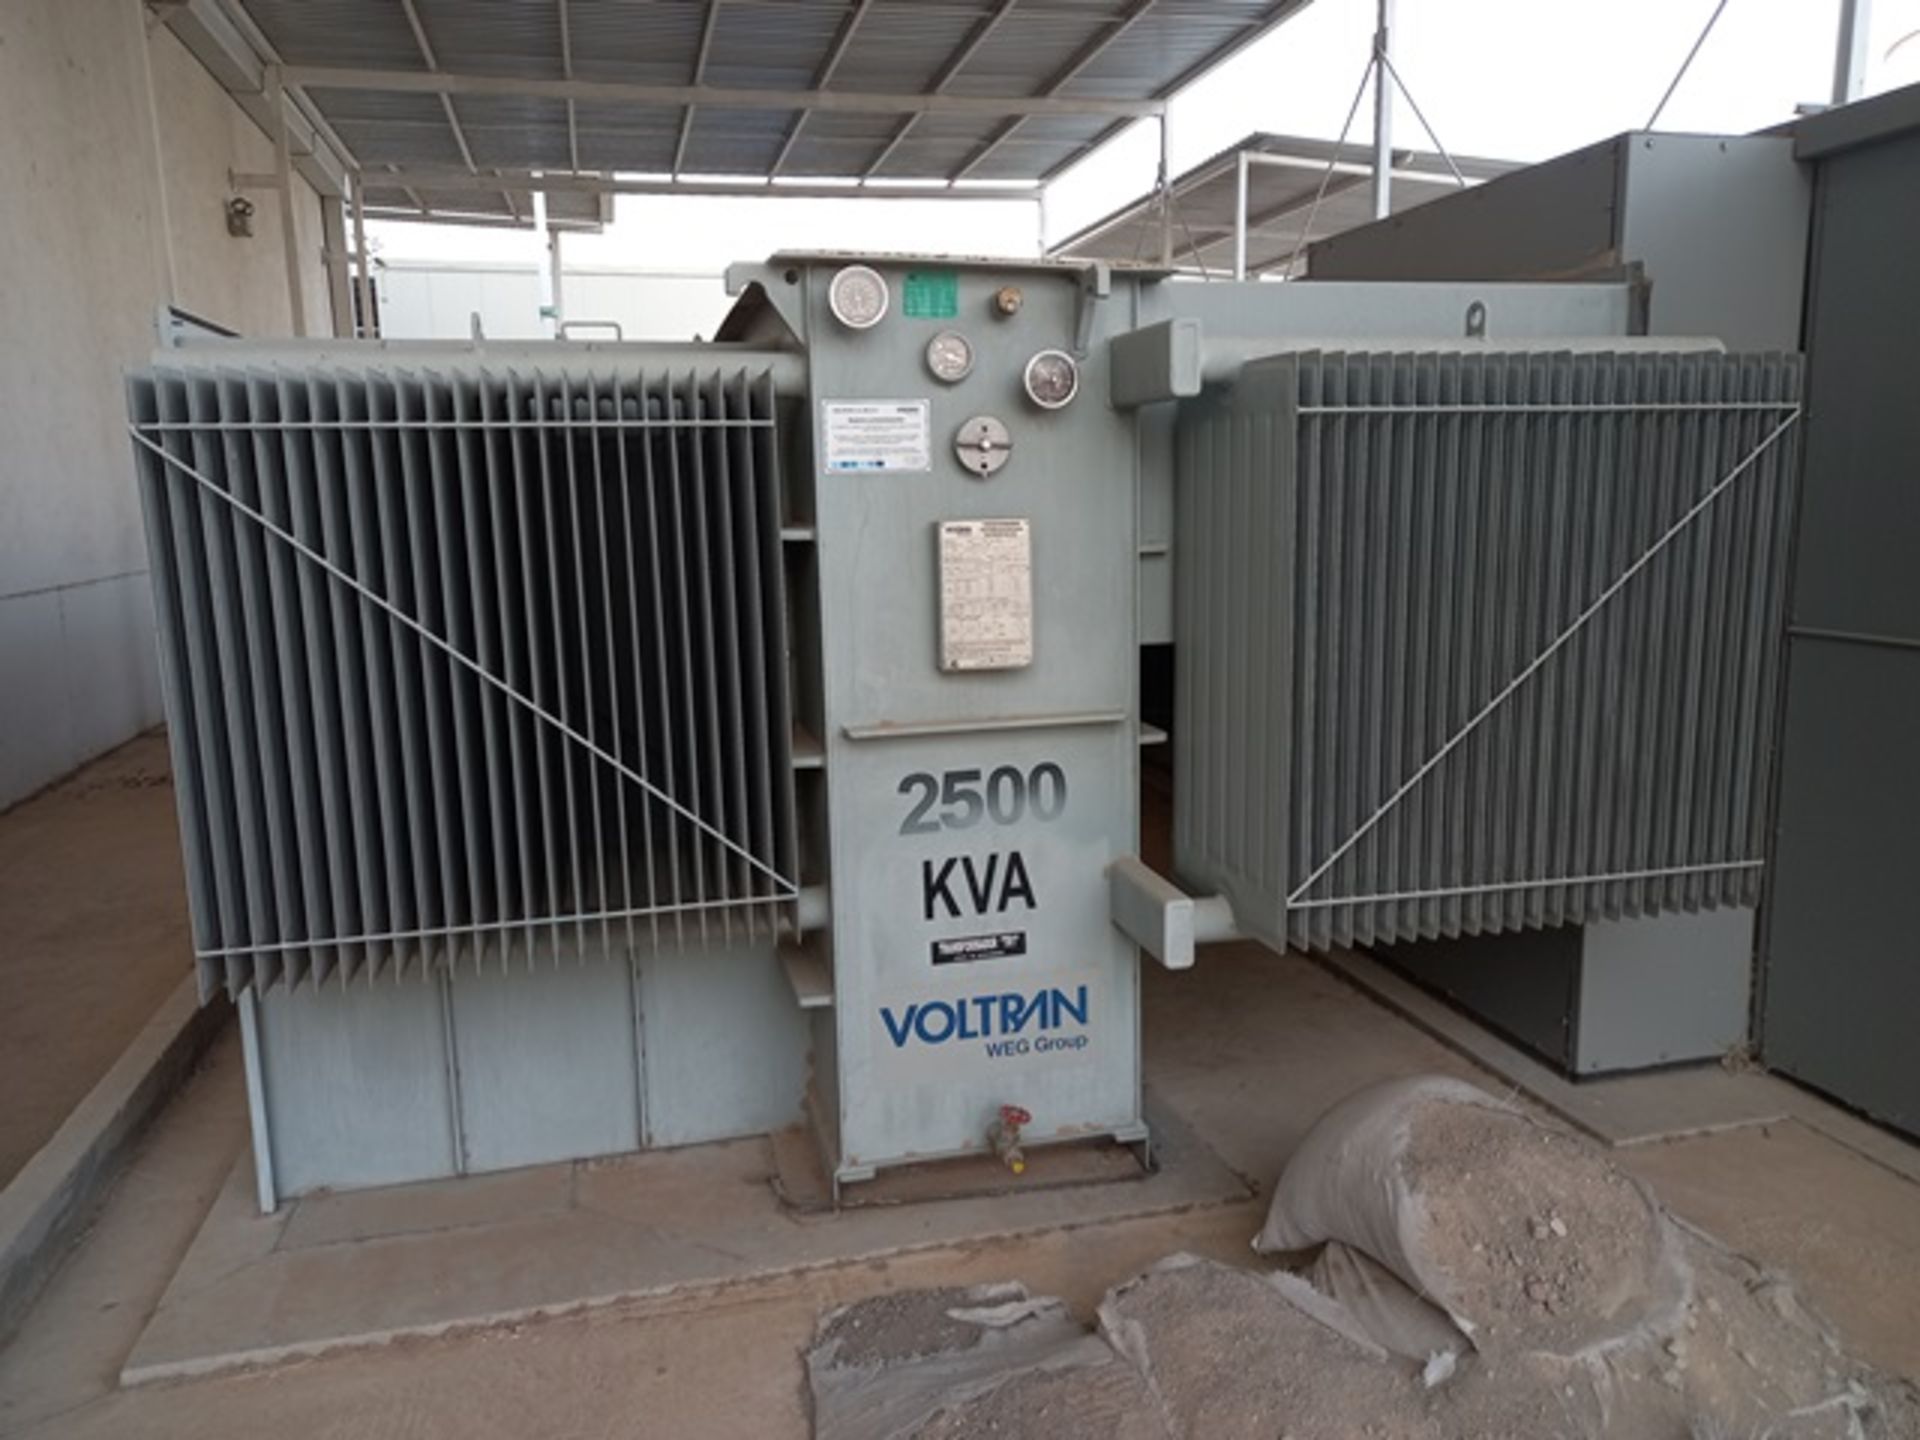 2500 KVA Electric Transformer, 34,500-480Y/277 V, Serial Number: 1032904744, Year 2016